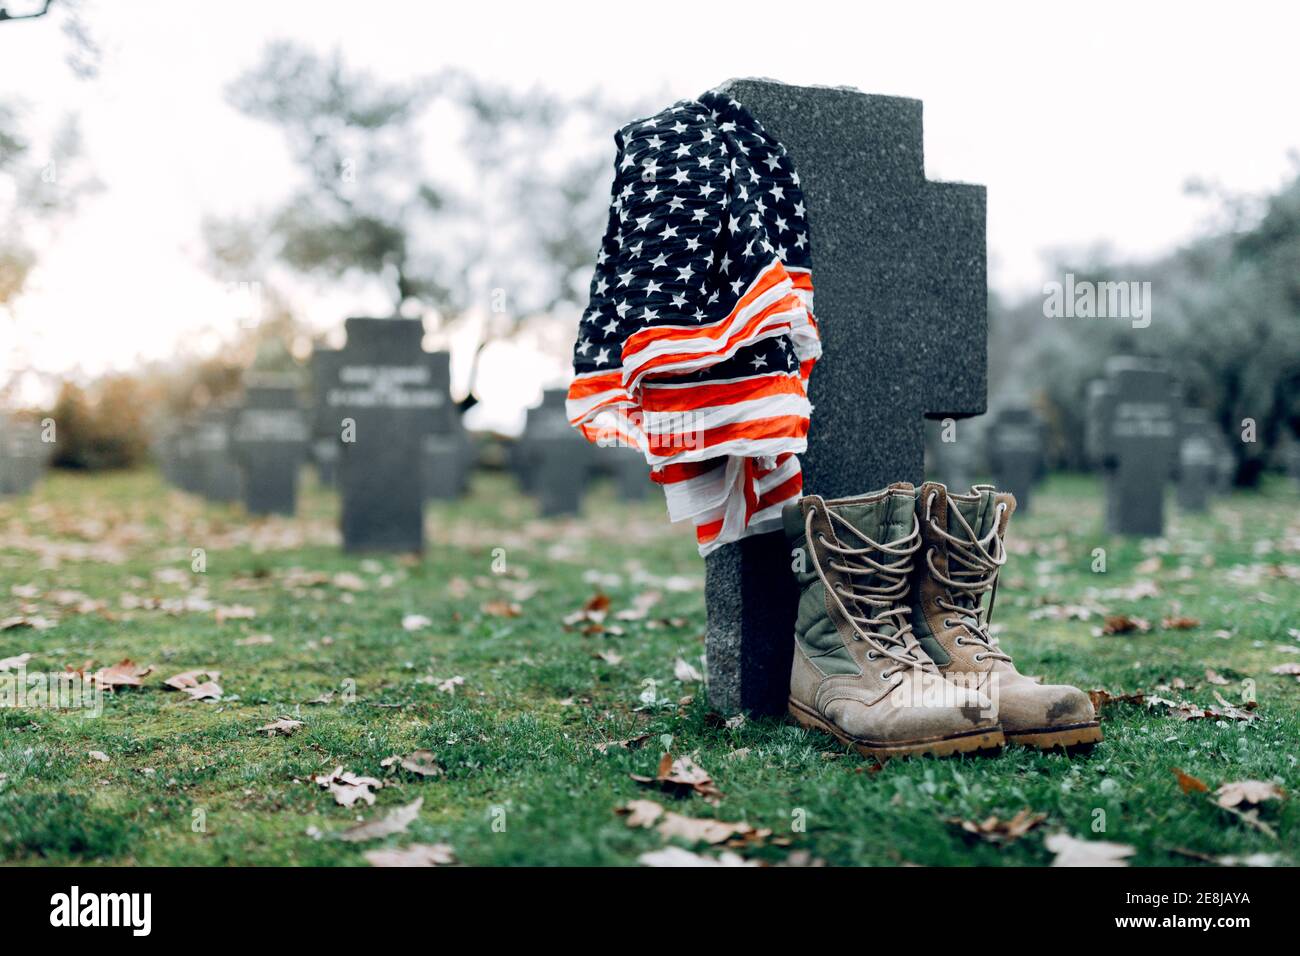 National American flag and army flag placed on gravestone in military cemetery on early autumn day Stock Photo